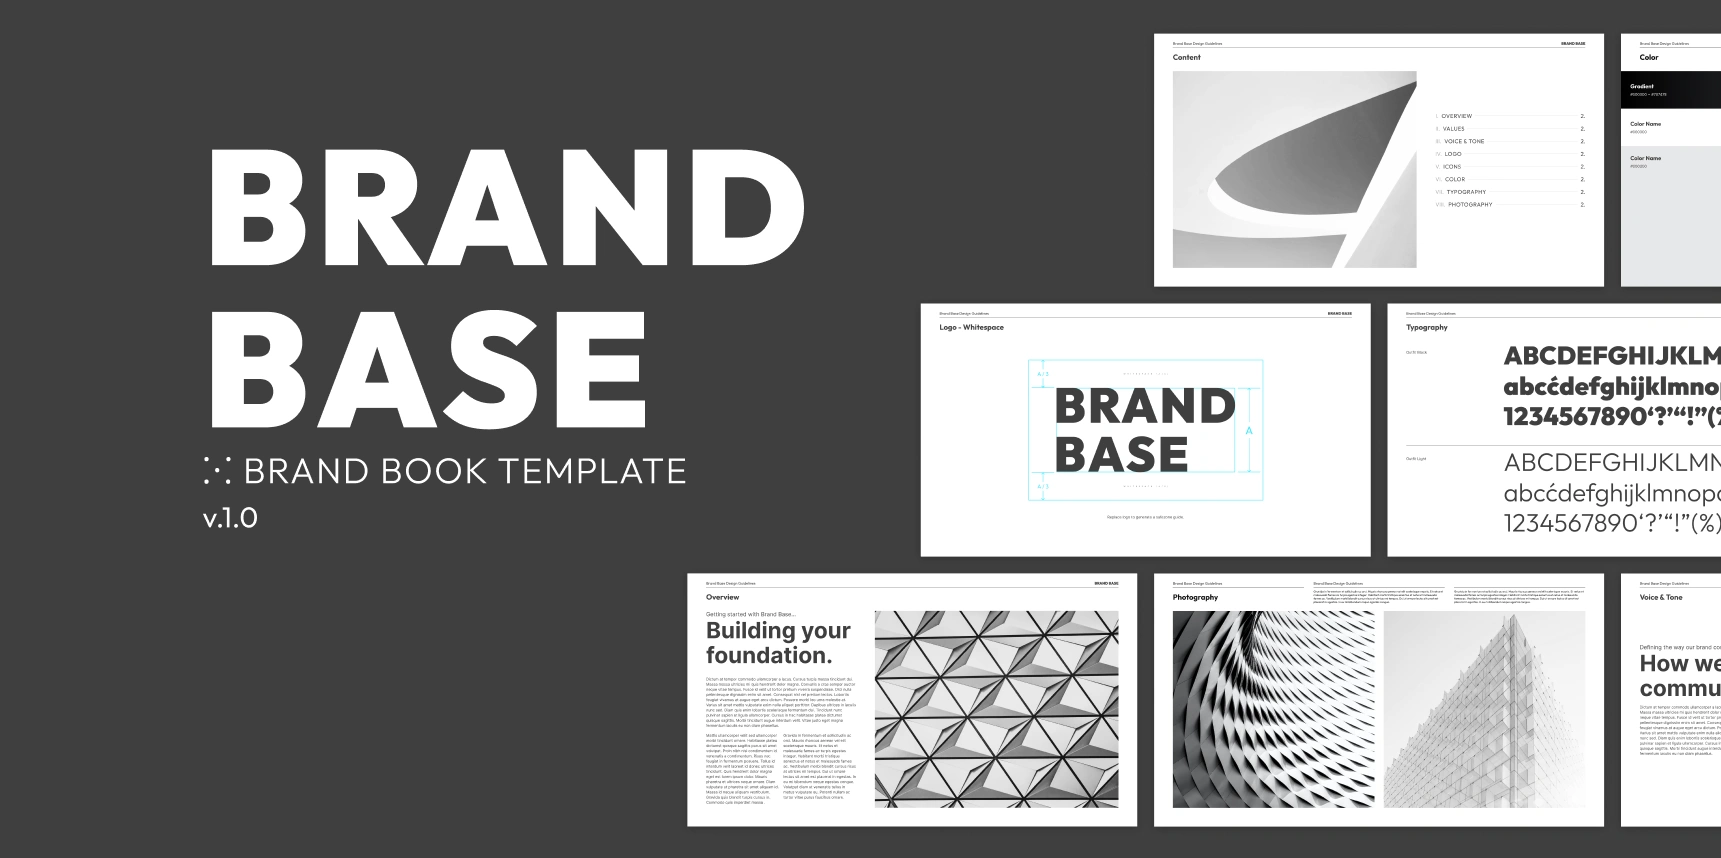 Brand Base: Brand Guidelines Template